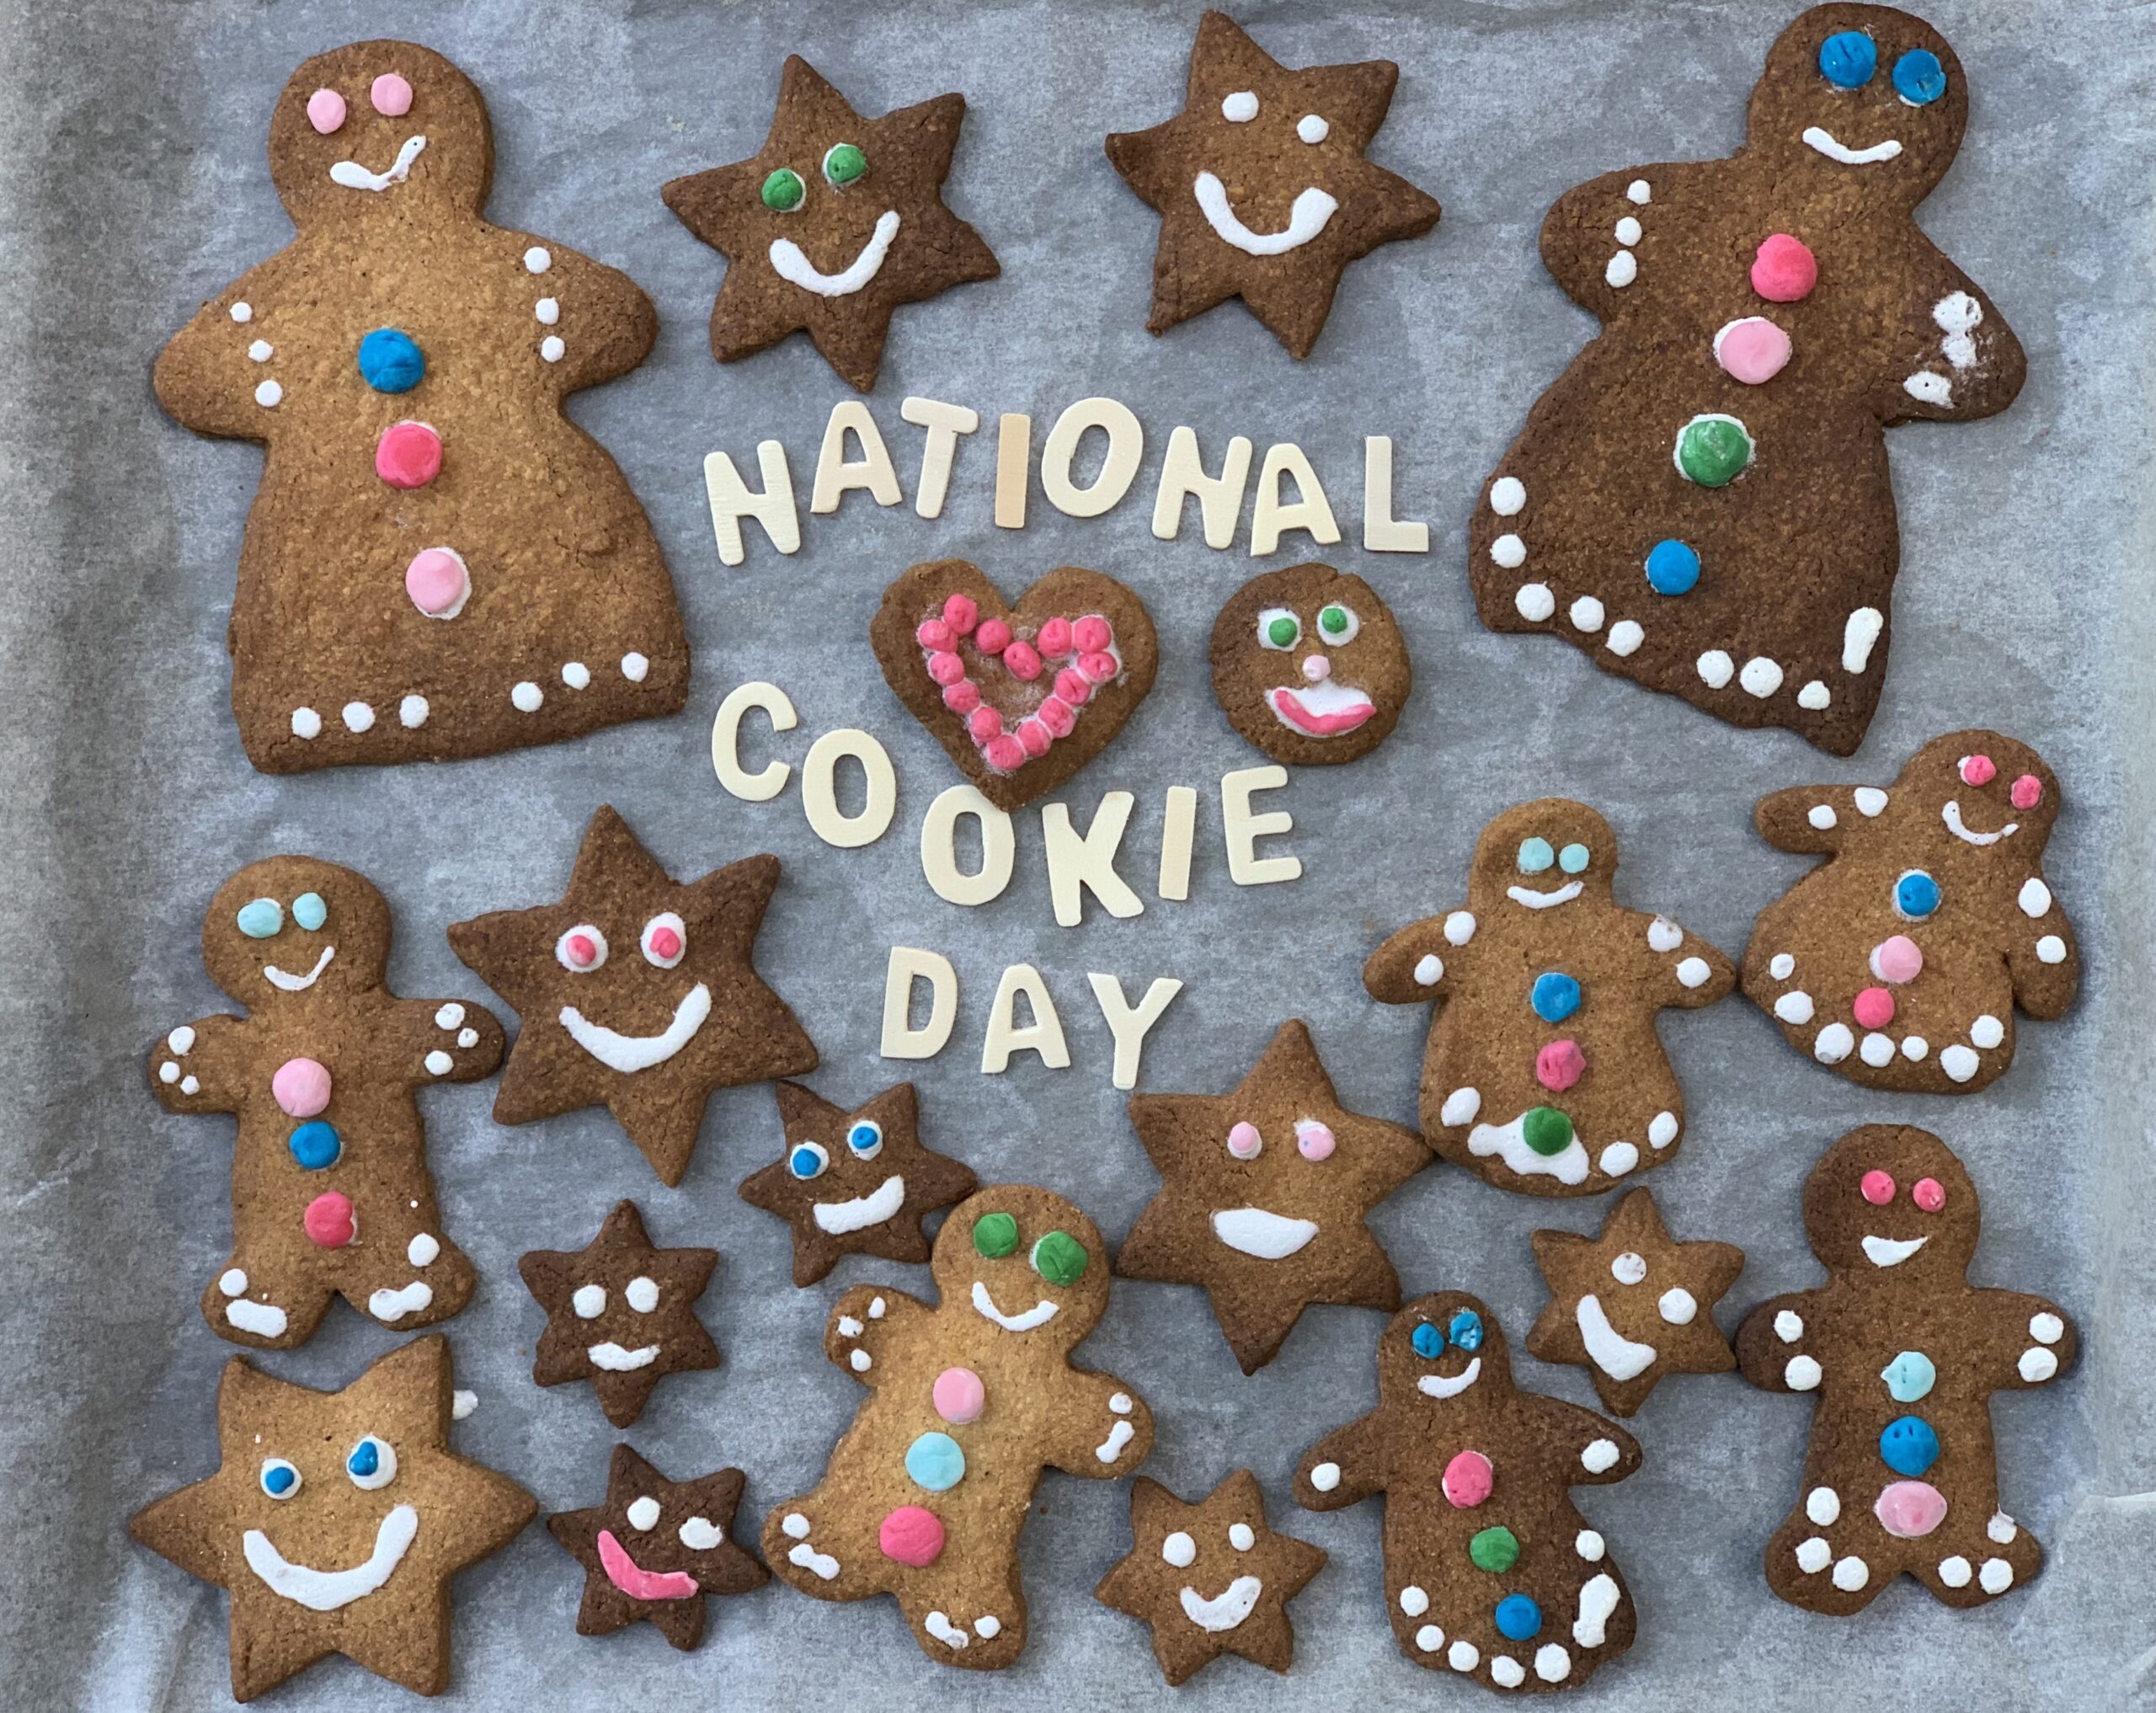 Celebrate National Cookie Day, December 4, 2020